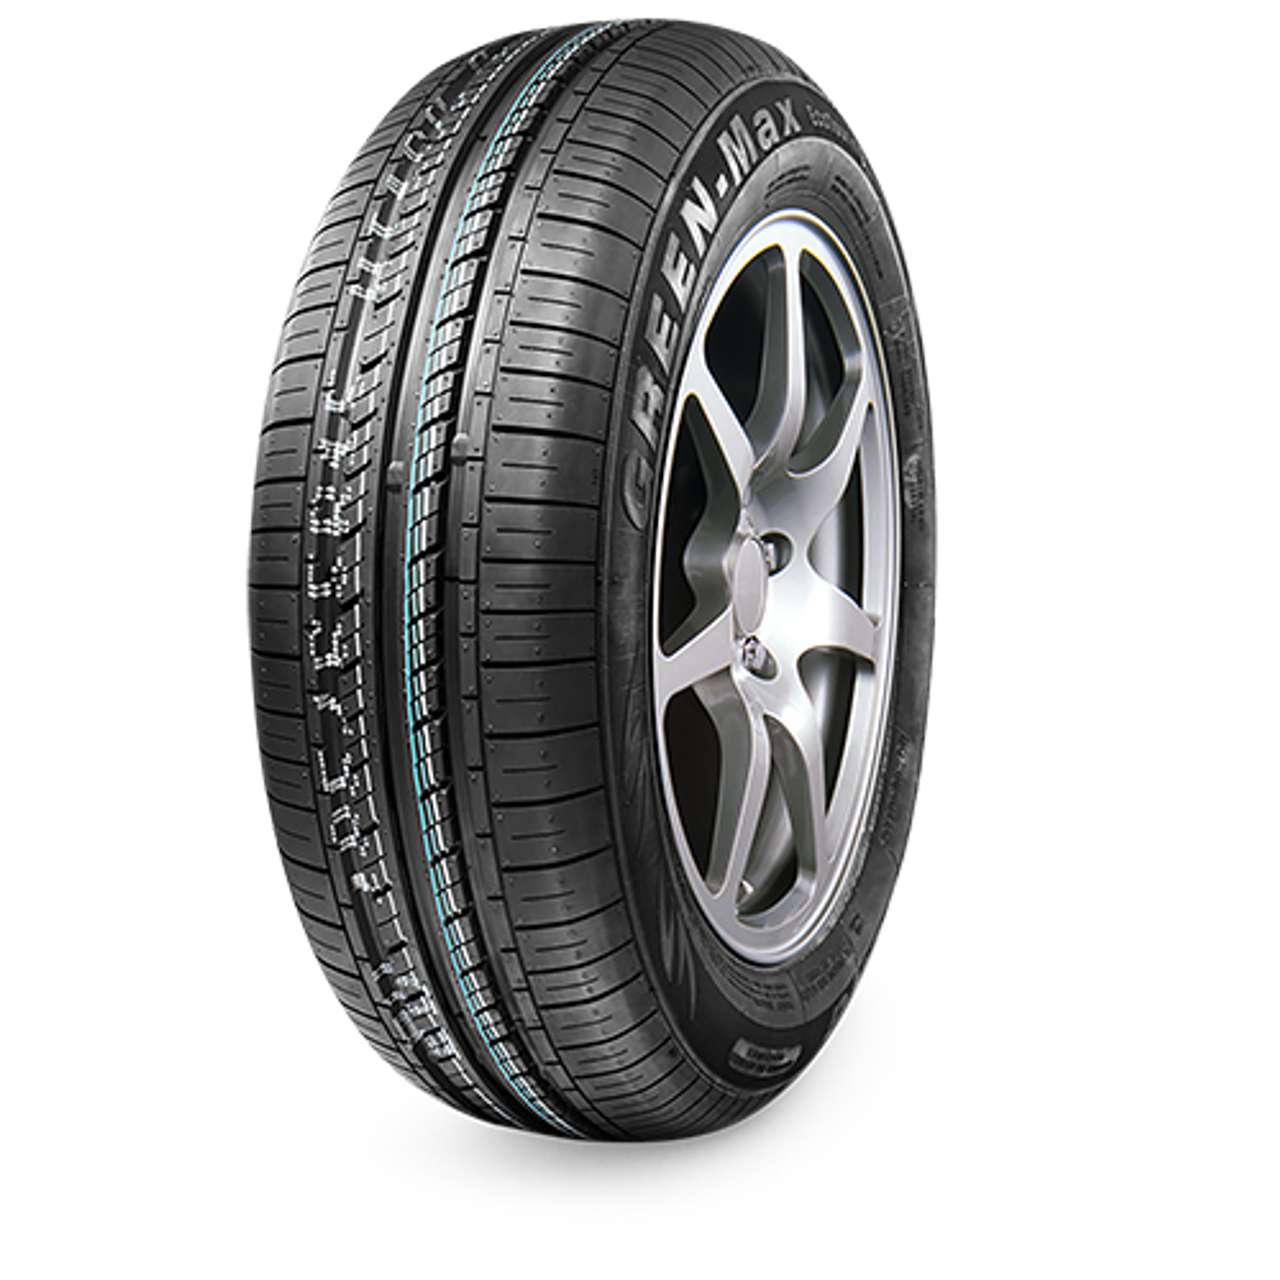 LINGLONG GREEN-MAX ECOTOURING 145/70R12 69S BSW von LINGLONG